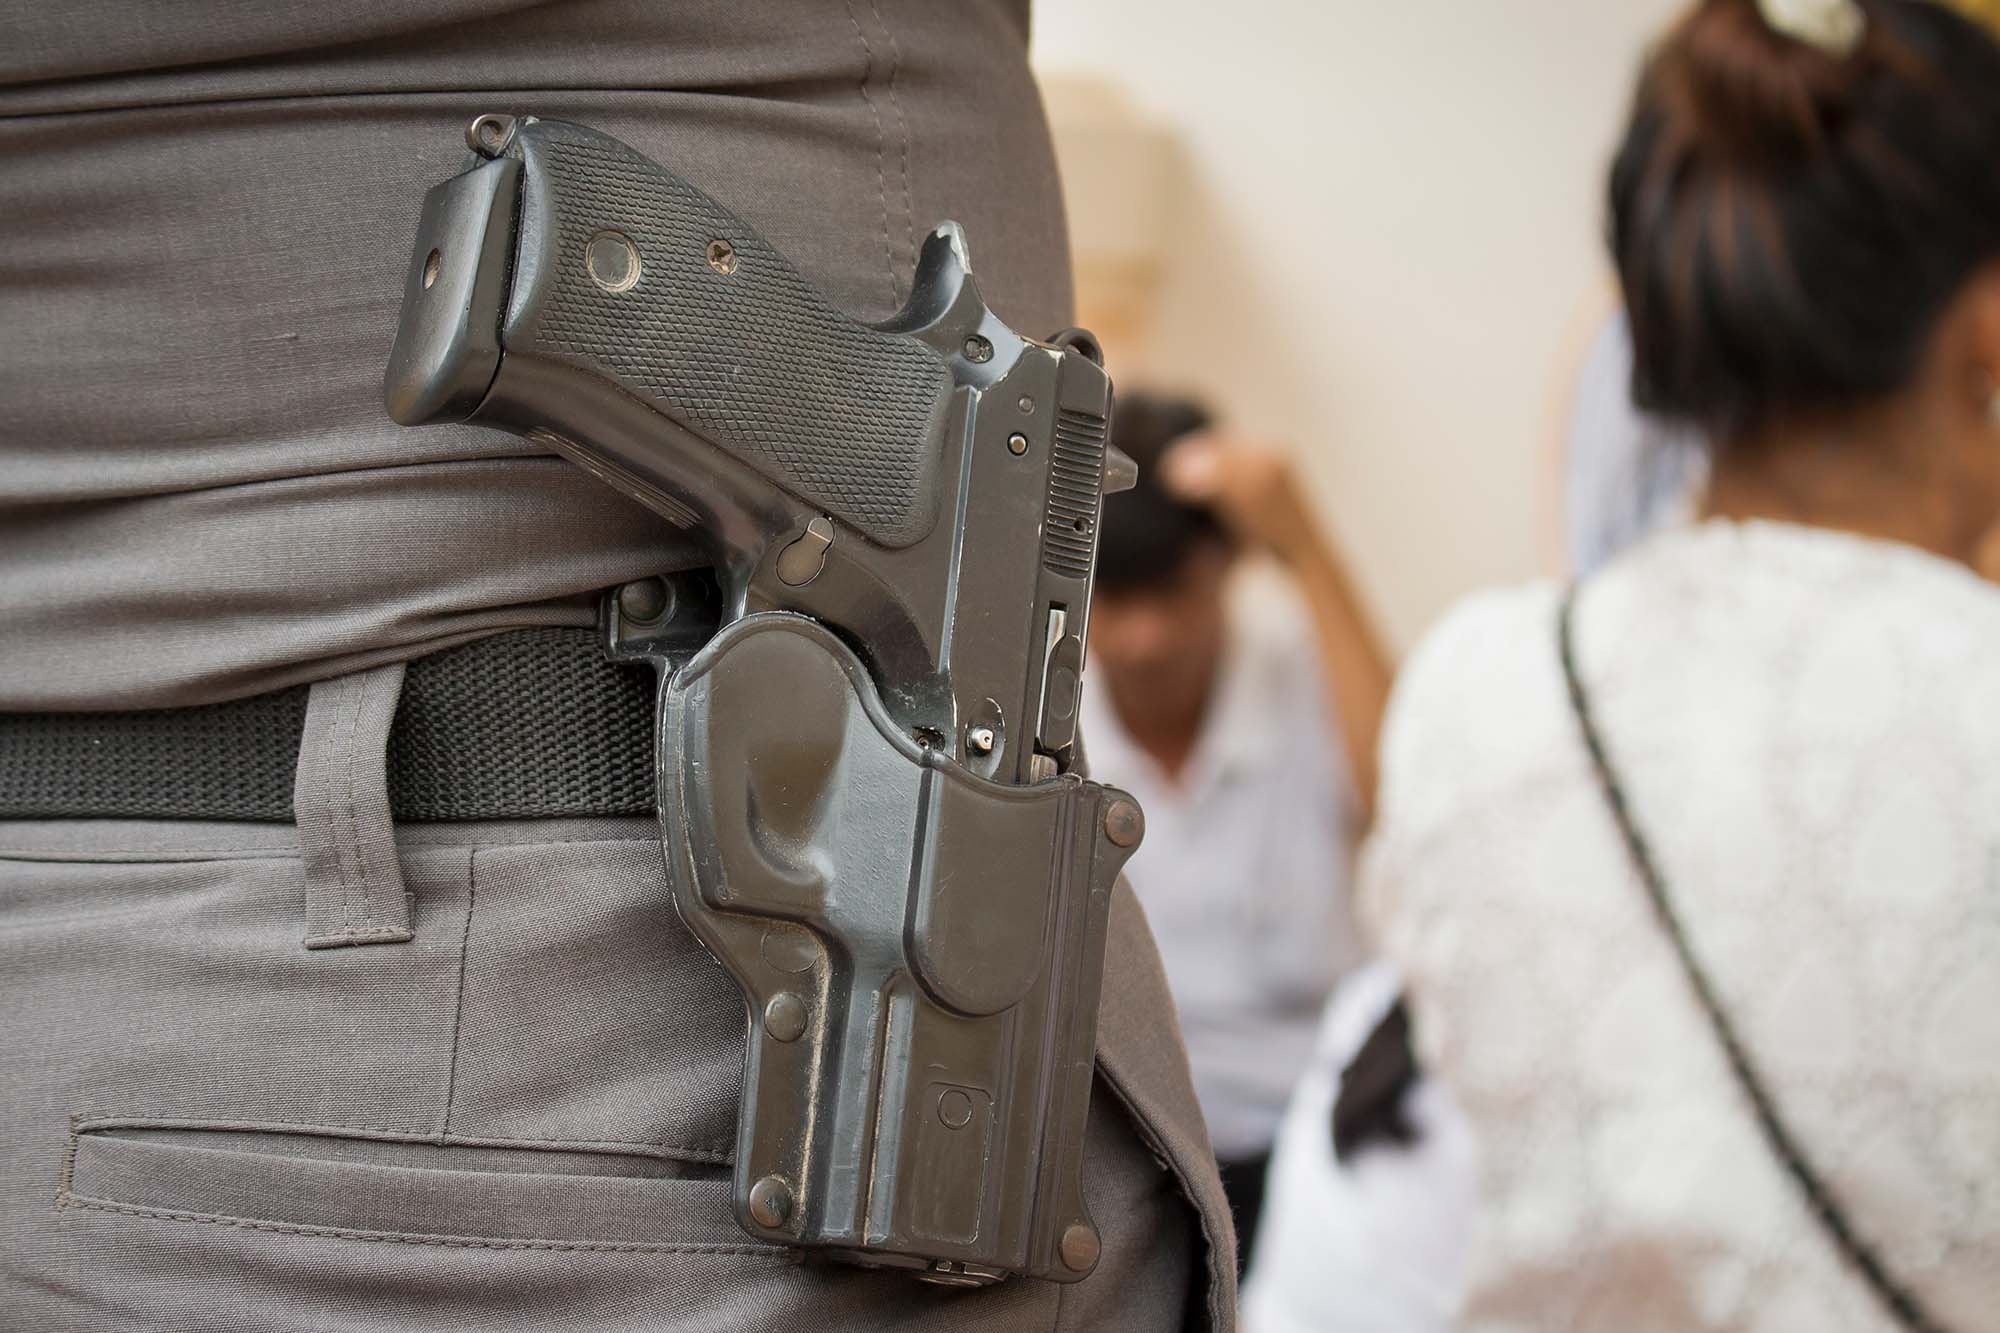 Closeup photo of someone with a gun in their holster. The holster is attached to their pants. Two blurry people can be seen in the background at what looks to be a cafe.